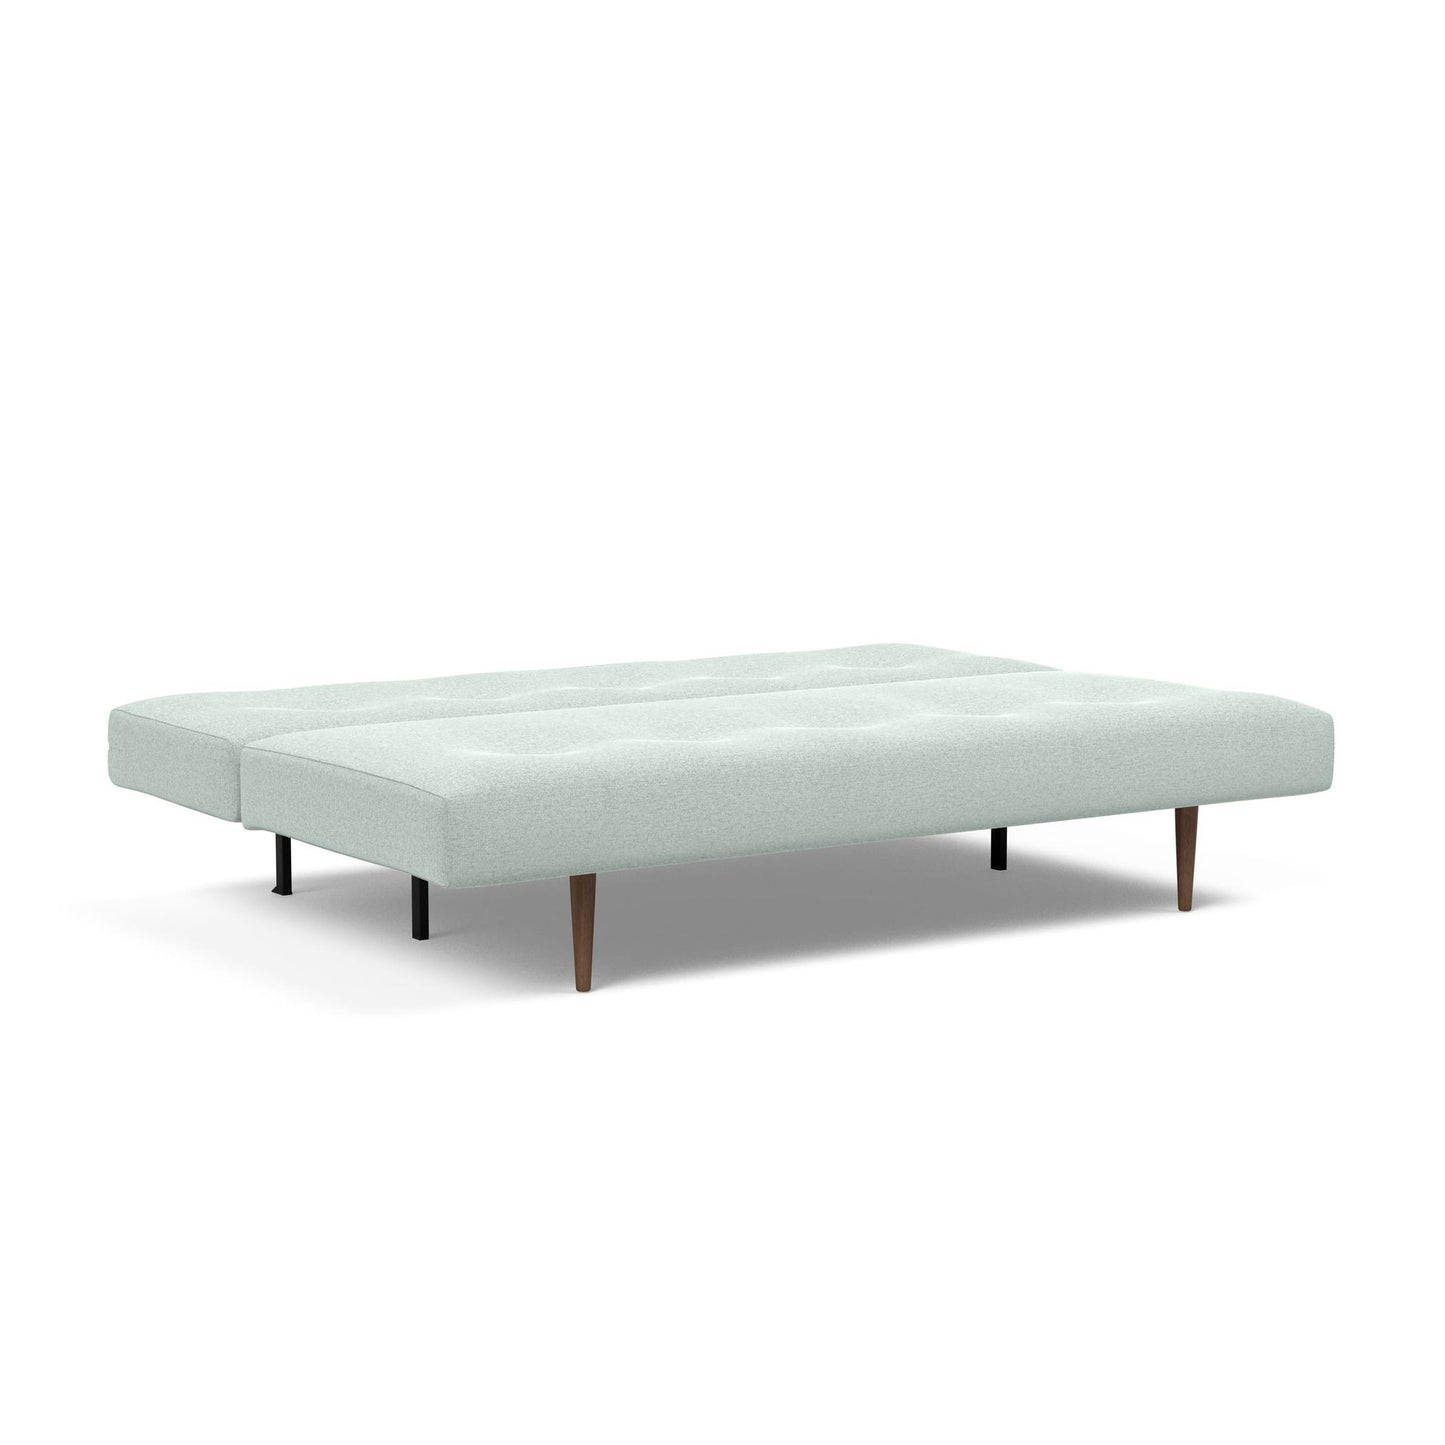 Recast Plus Sofa Bed in Soft Pacific Pearl